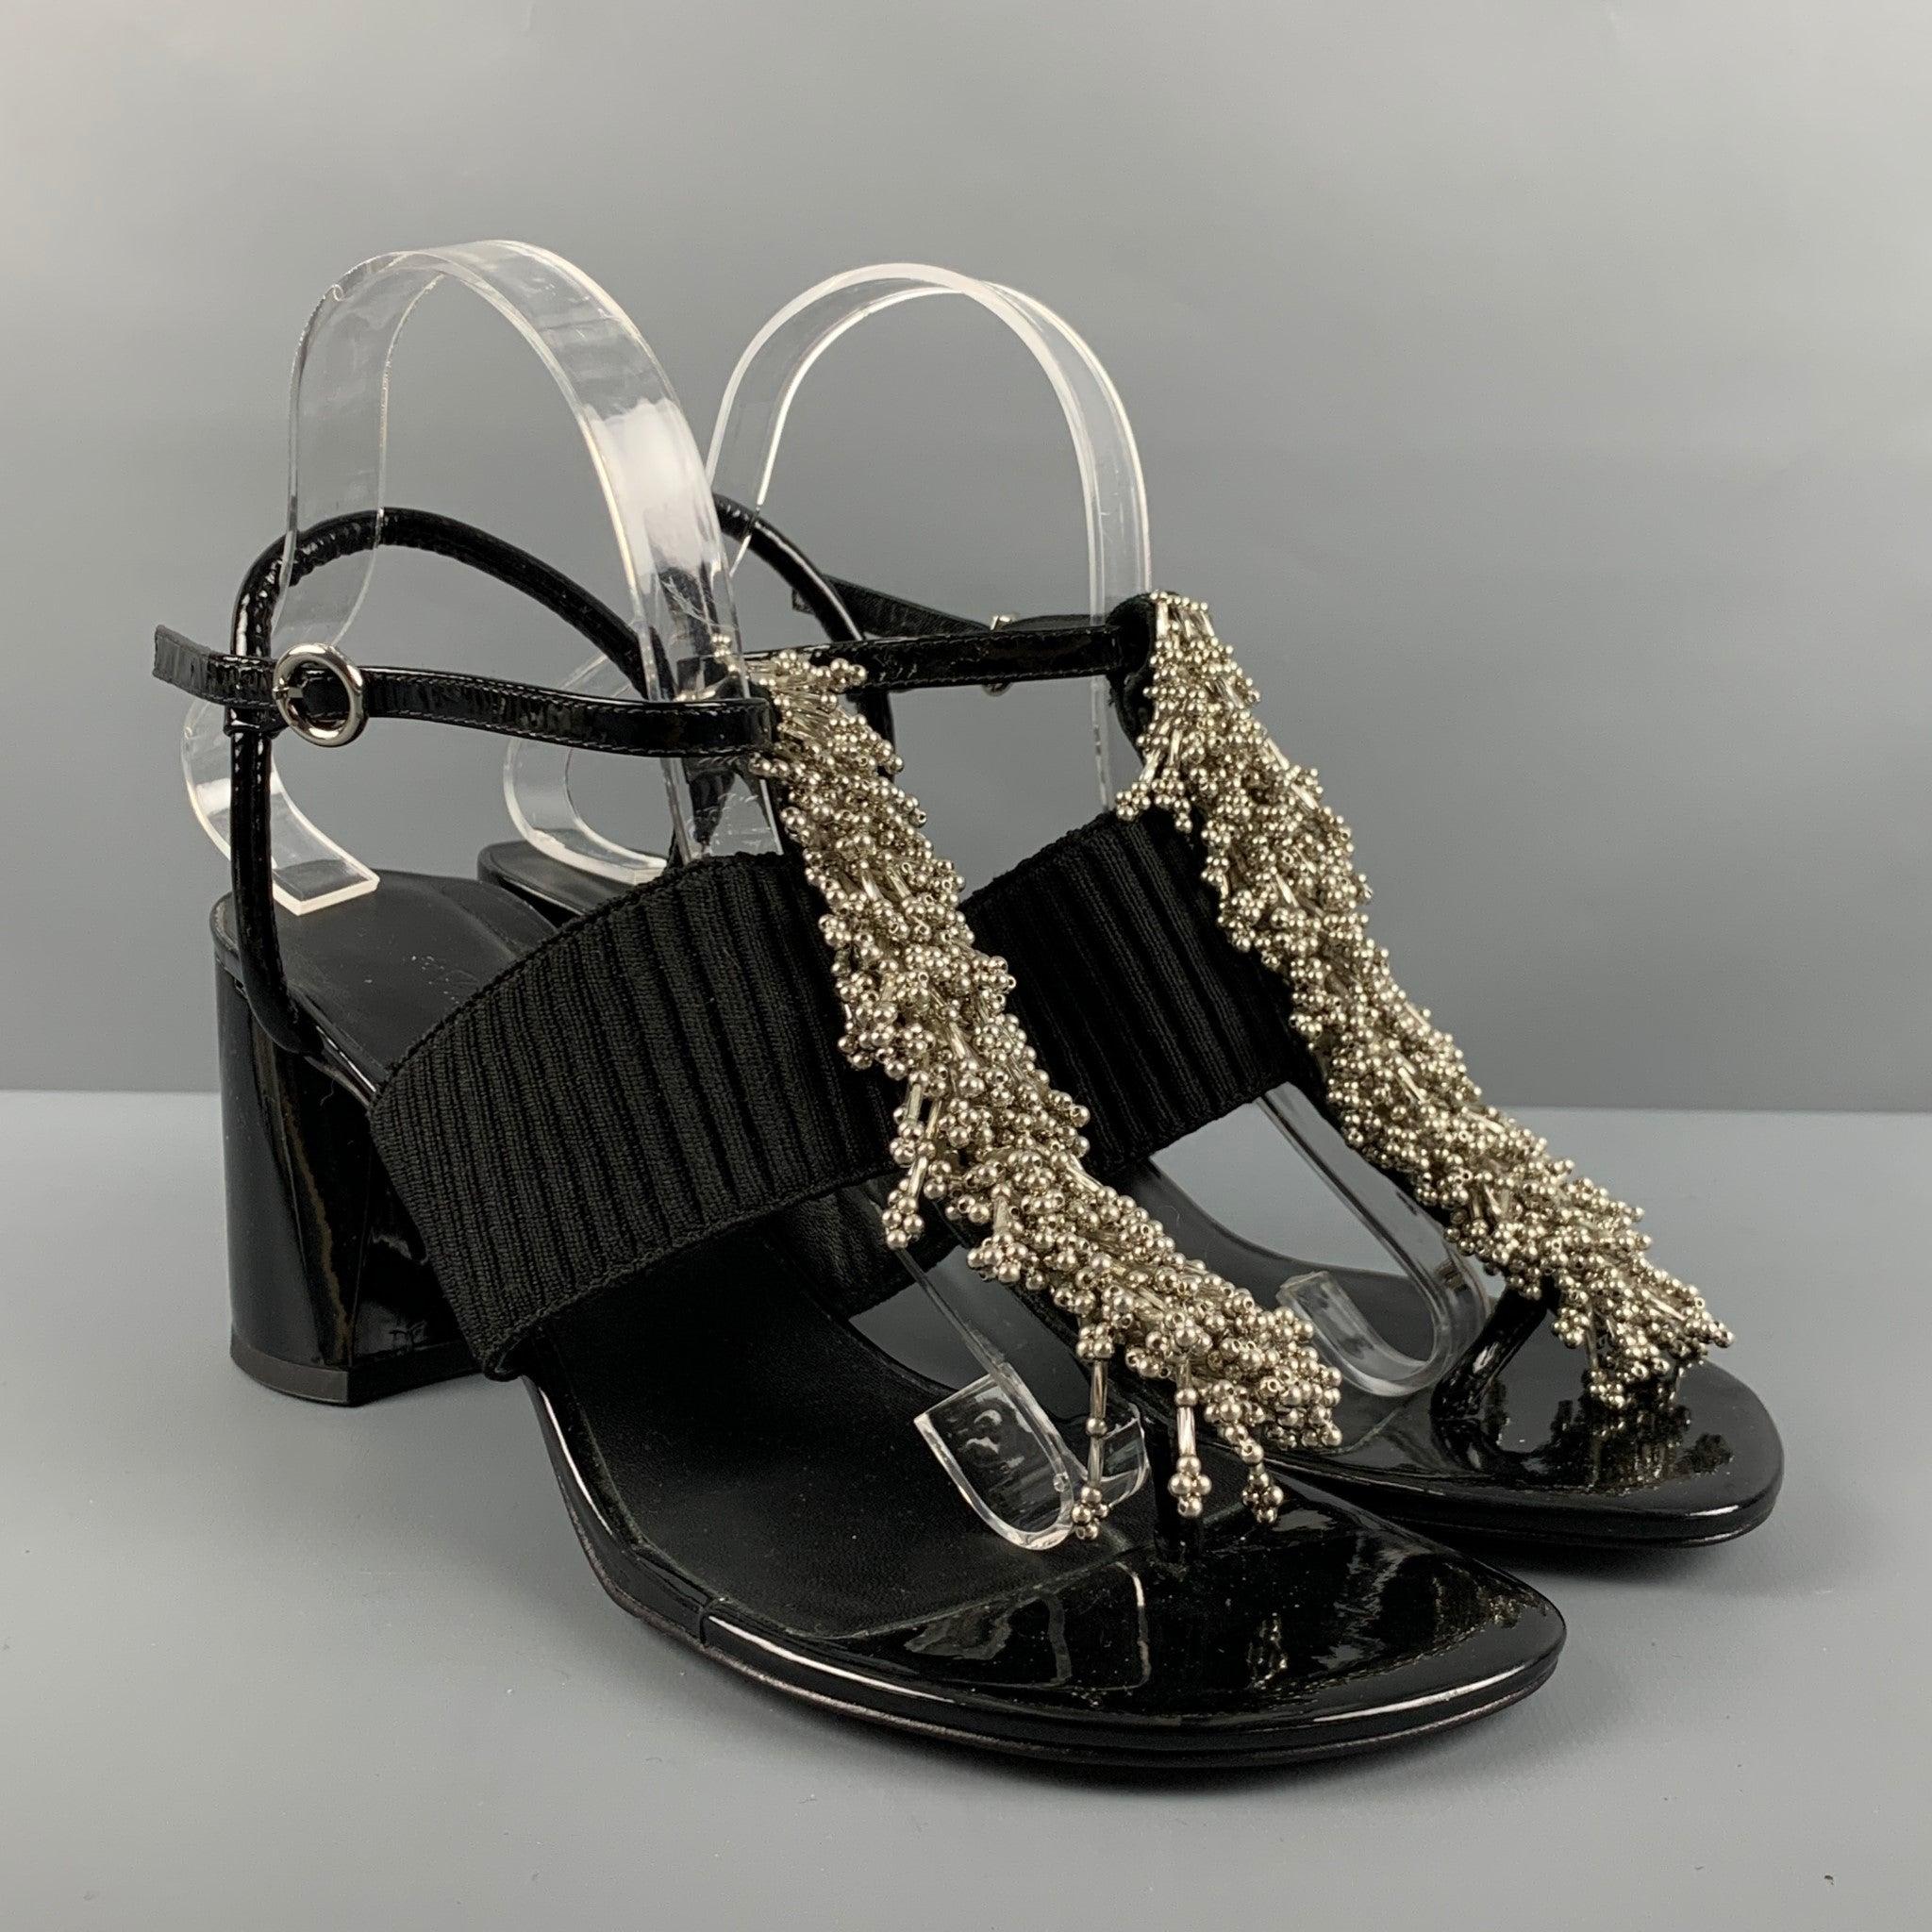 3.1 PHILLIP LIM sandals comes in a black patent leather featuring silver tone beaded details at center front, round chunky heel, elastic support, and an ankle strap closure. Comes with dust bag.
VERY Good Pre-Owned Condition. Minor signs of wear.